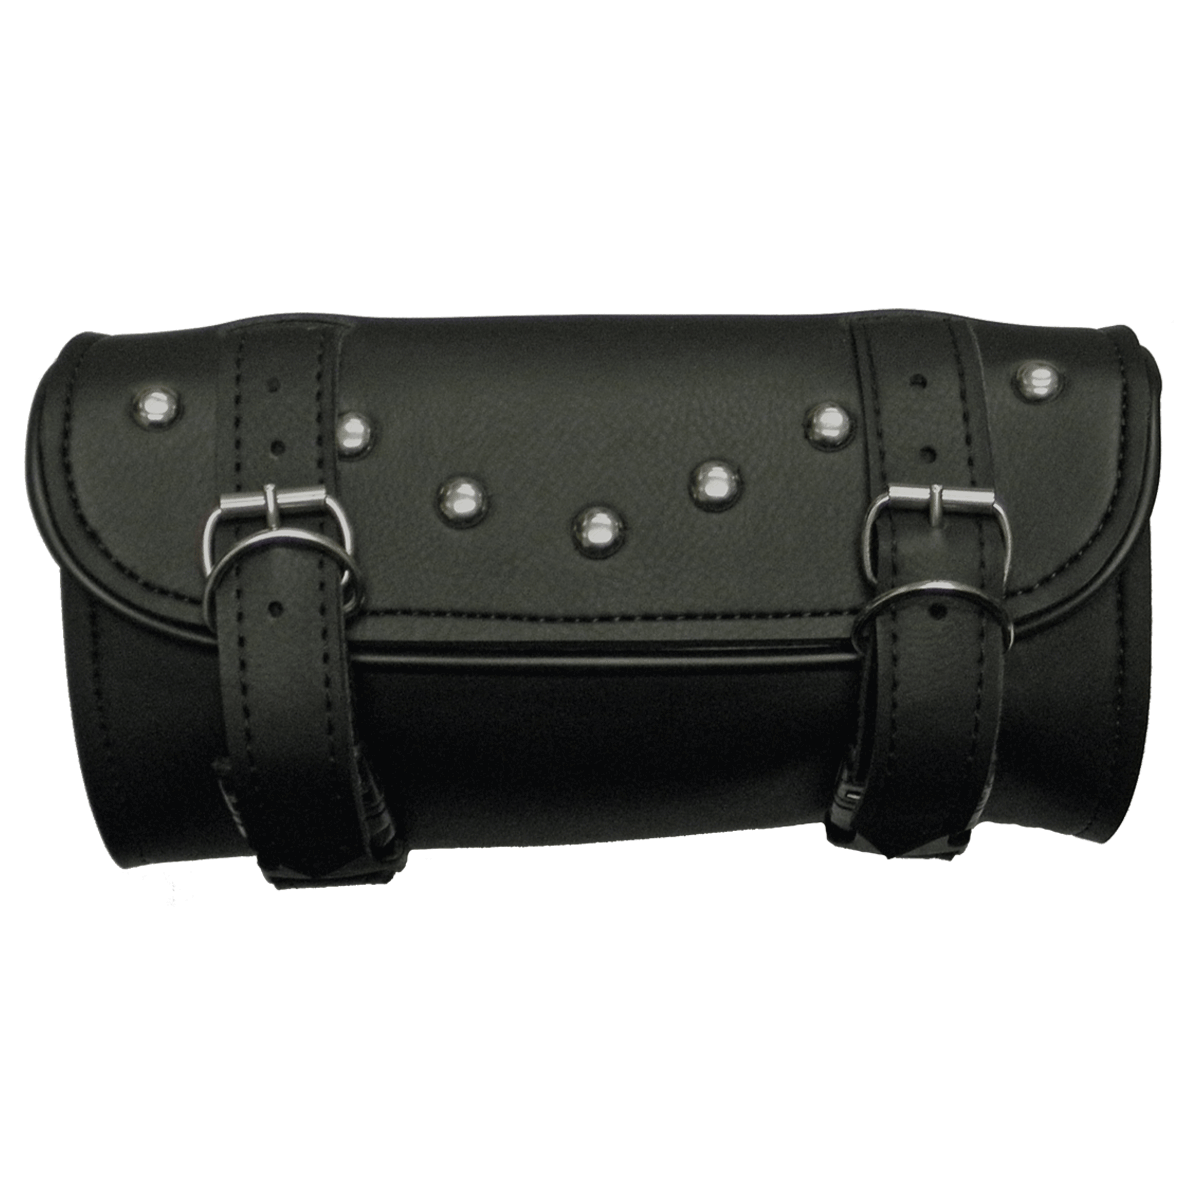 VS108H Hard Shell 2 Strap Studded Tool Bag with Quick Releases